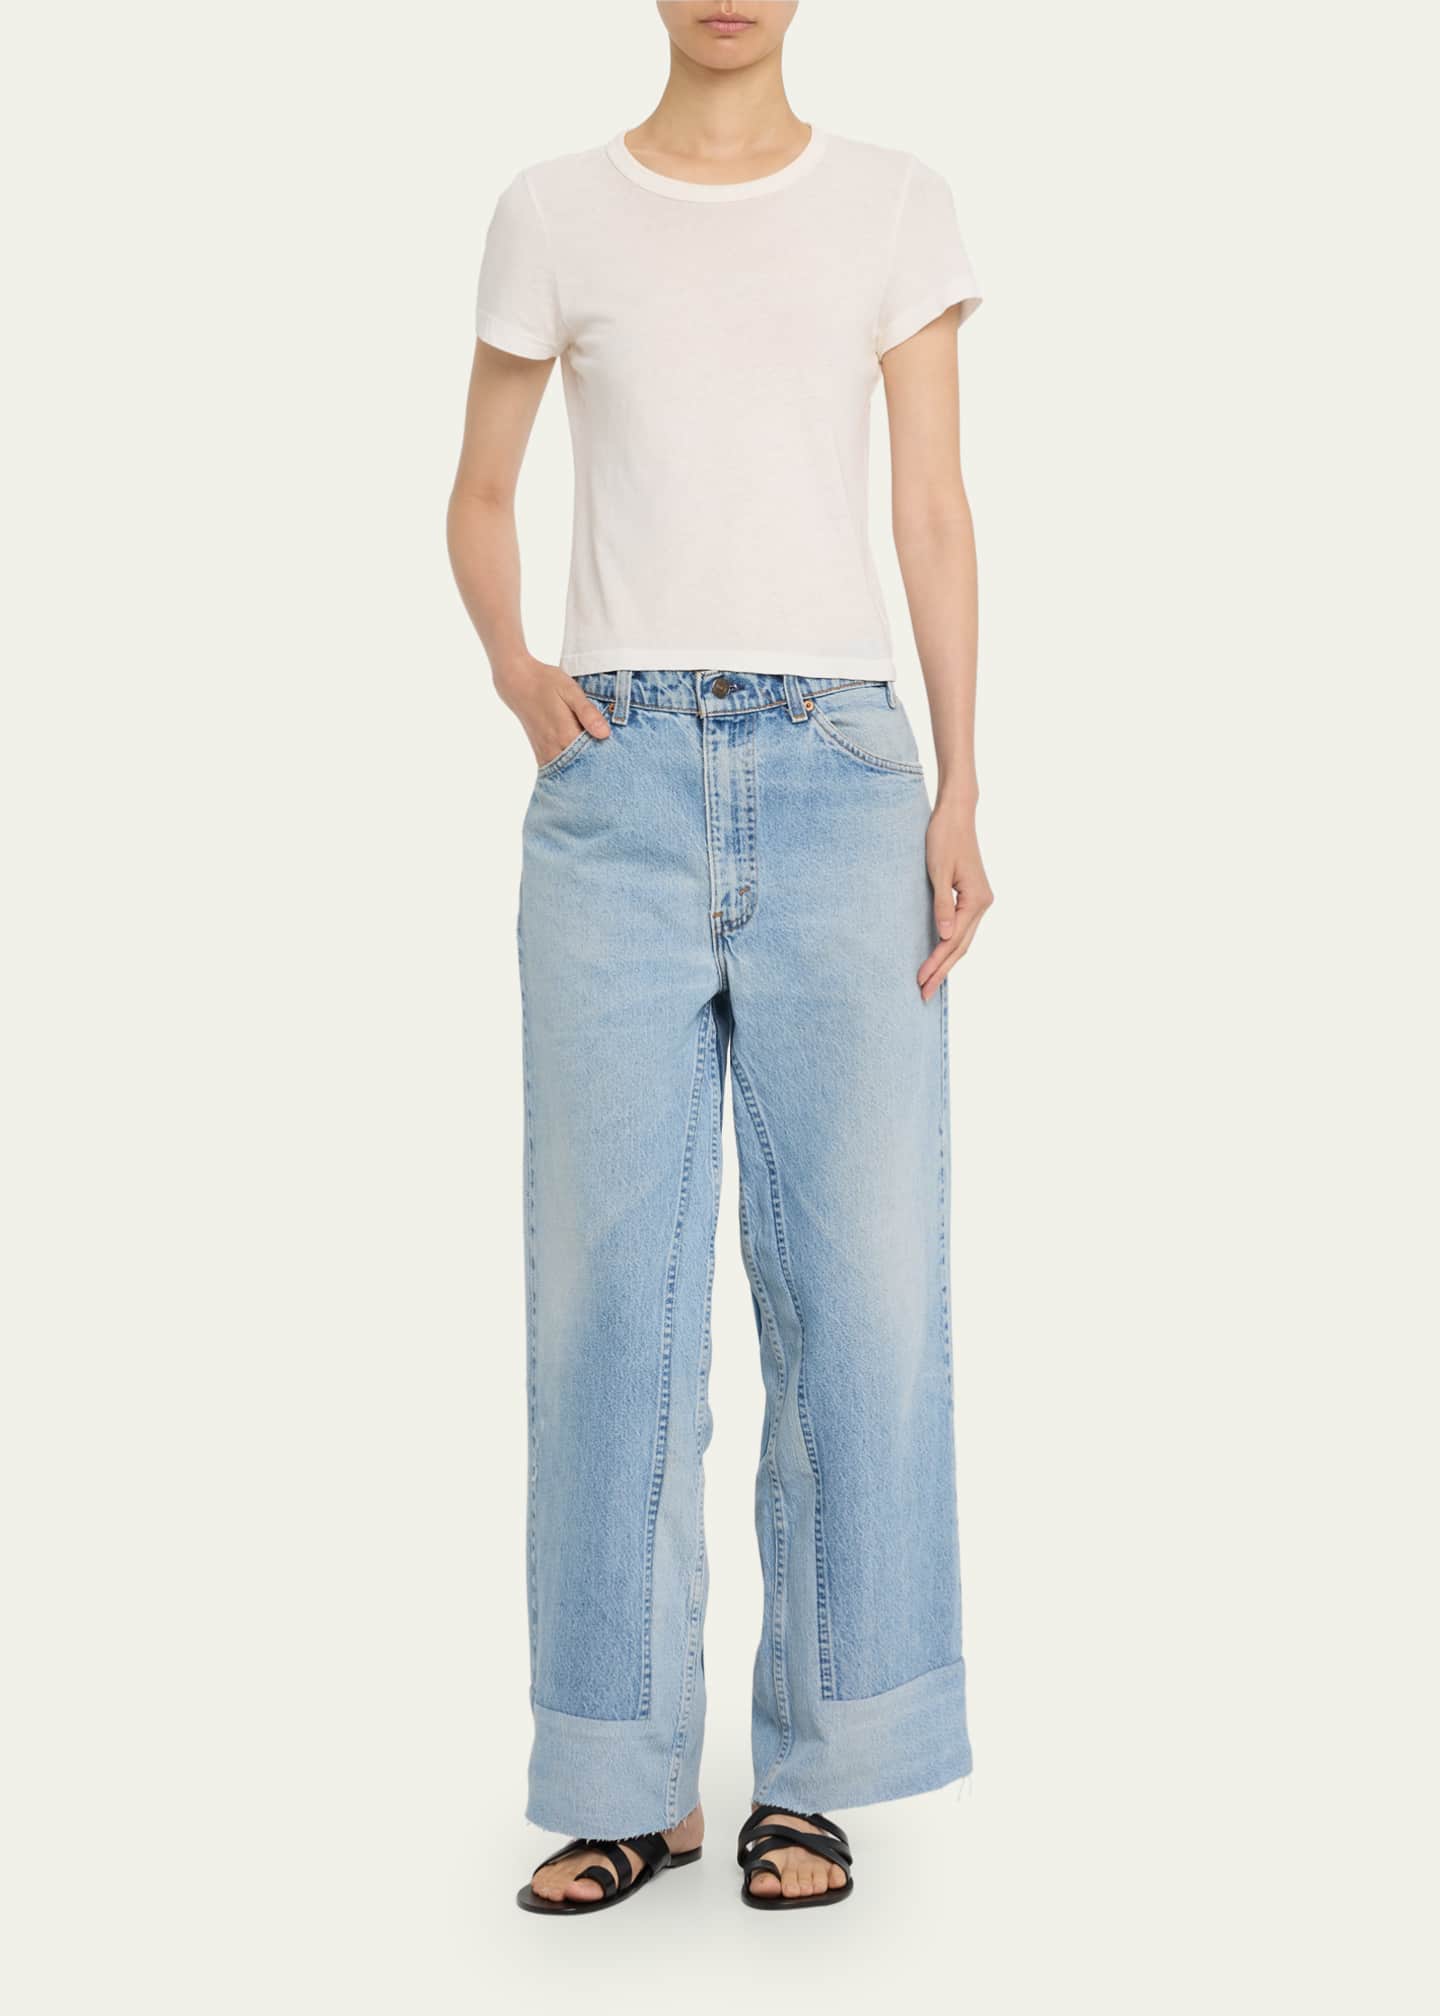 B SIDES Reworked Culotte Jeans - Bergdorf Goodman